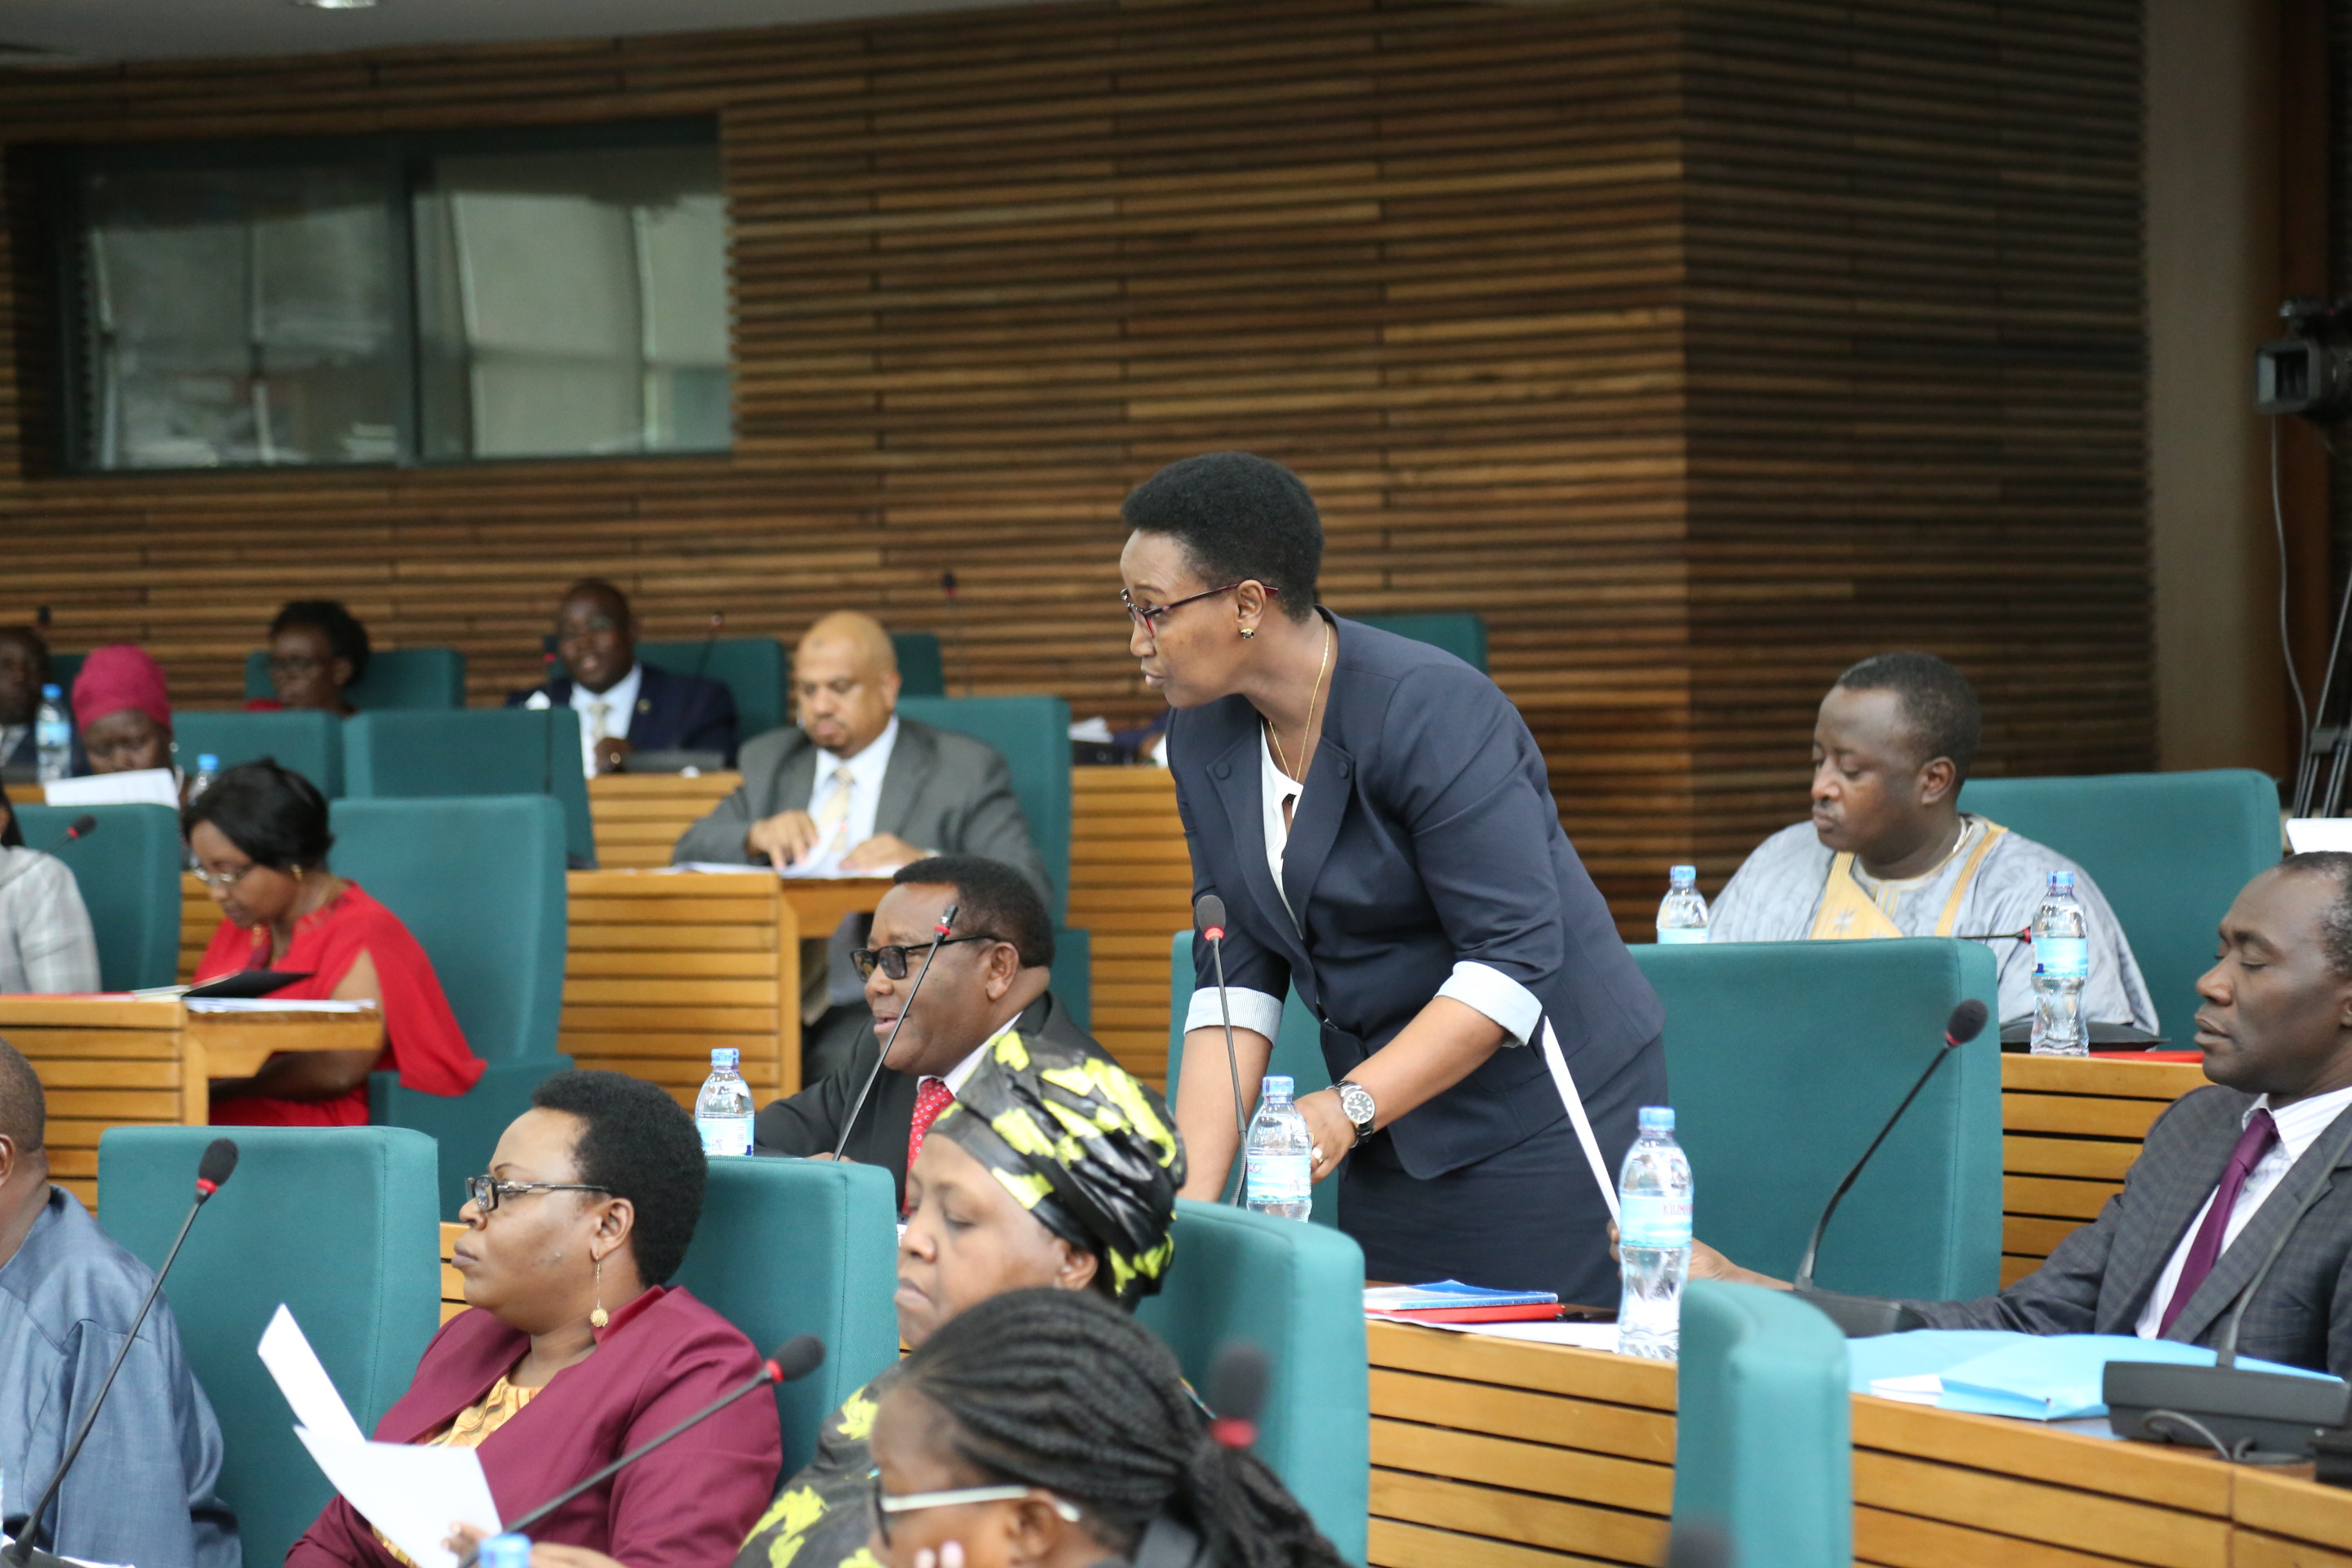 Hon Francine Rutazana has been granted leave to introduce a Bill to promote Access to essential medicines and pharmaceuticals promoted within the Community